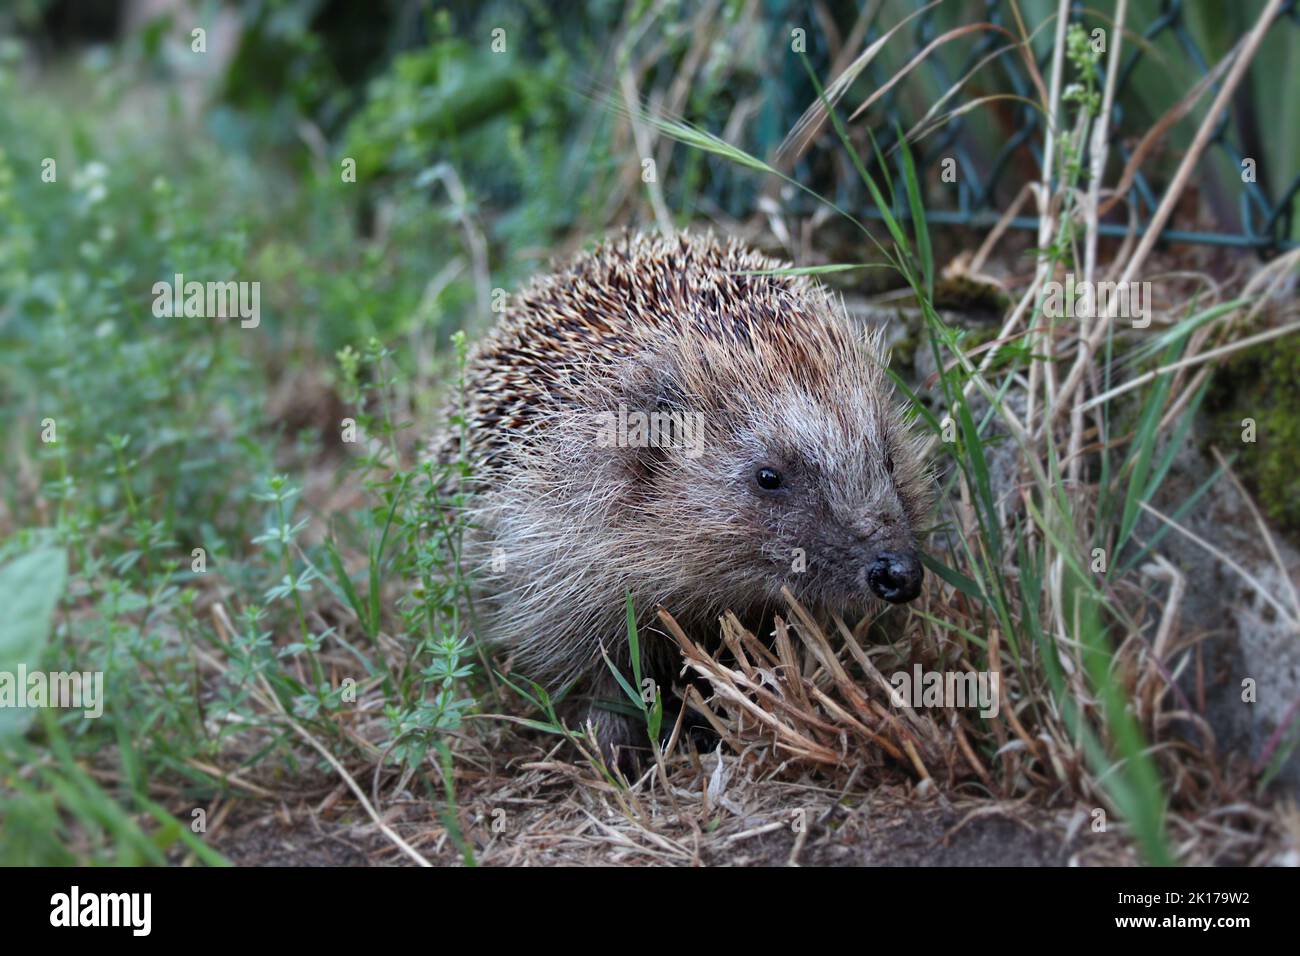 Hedgehog in the grass Stock Photo